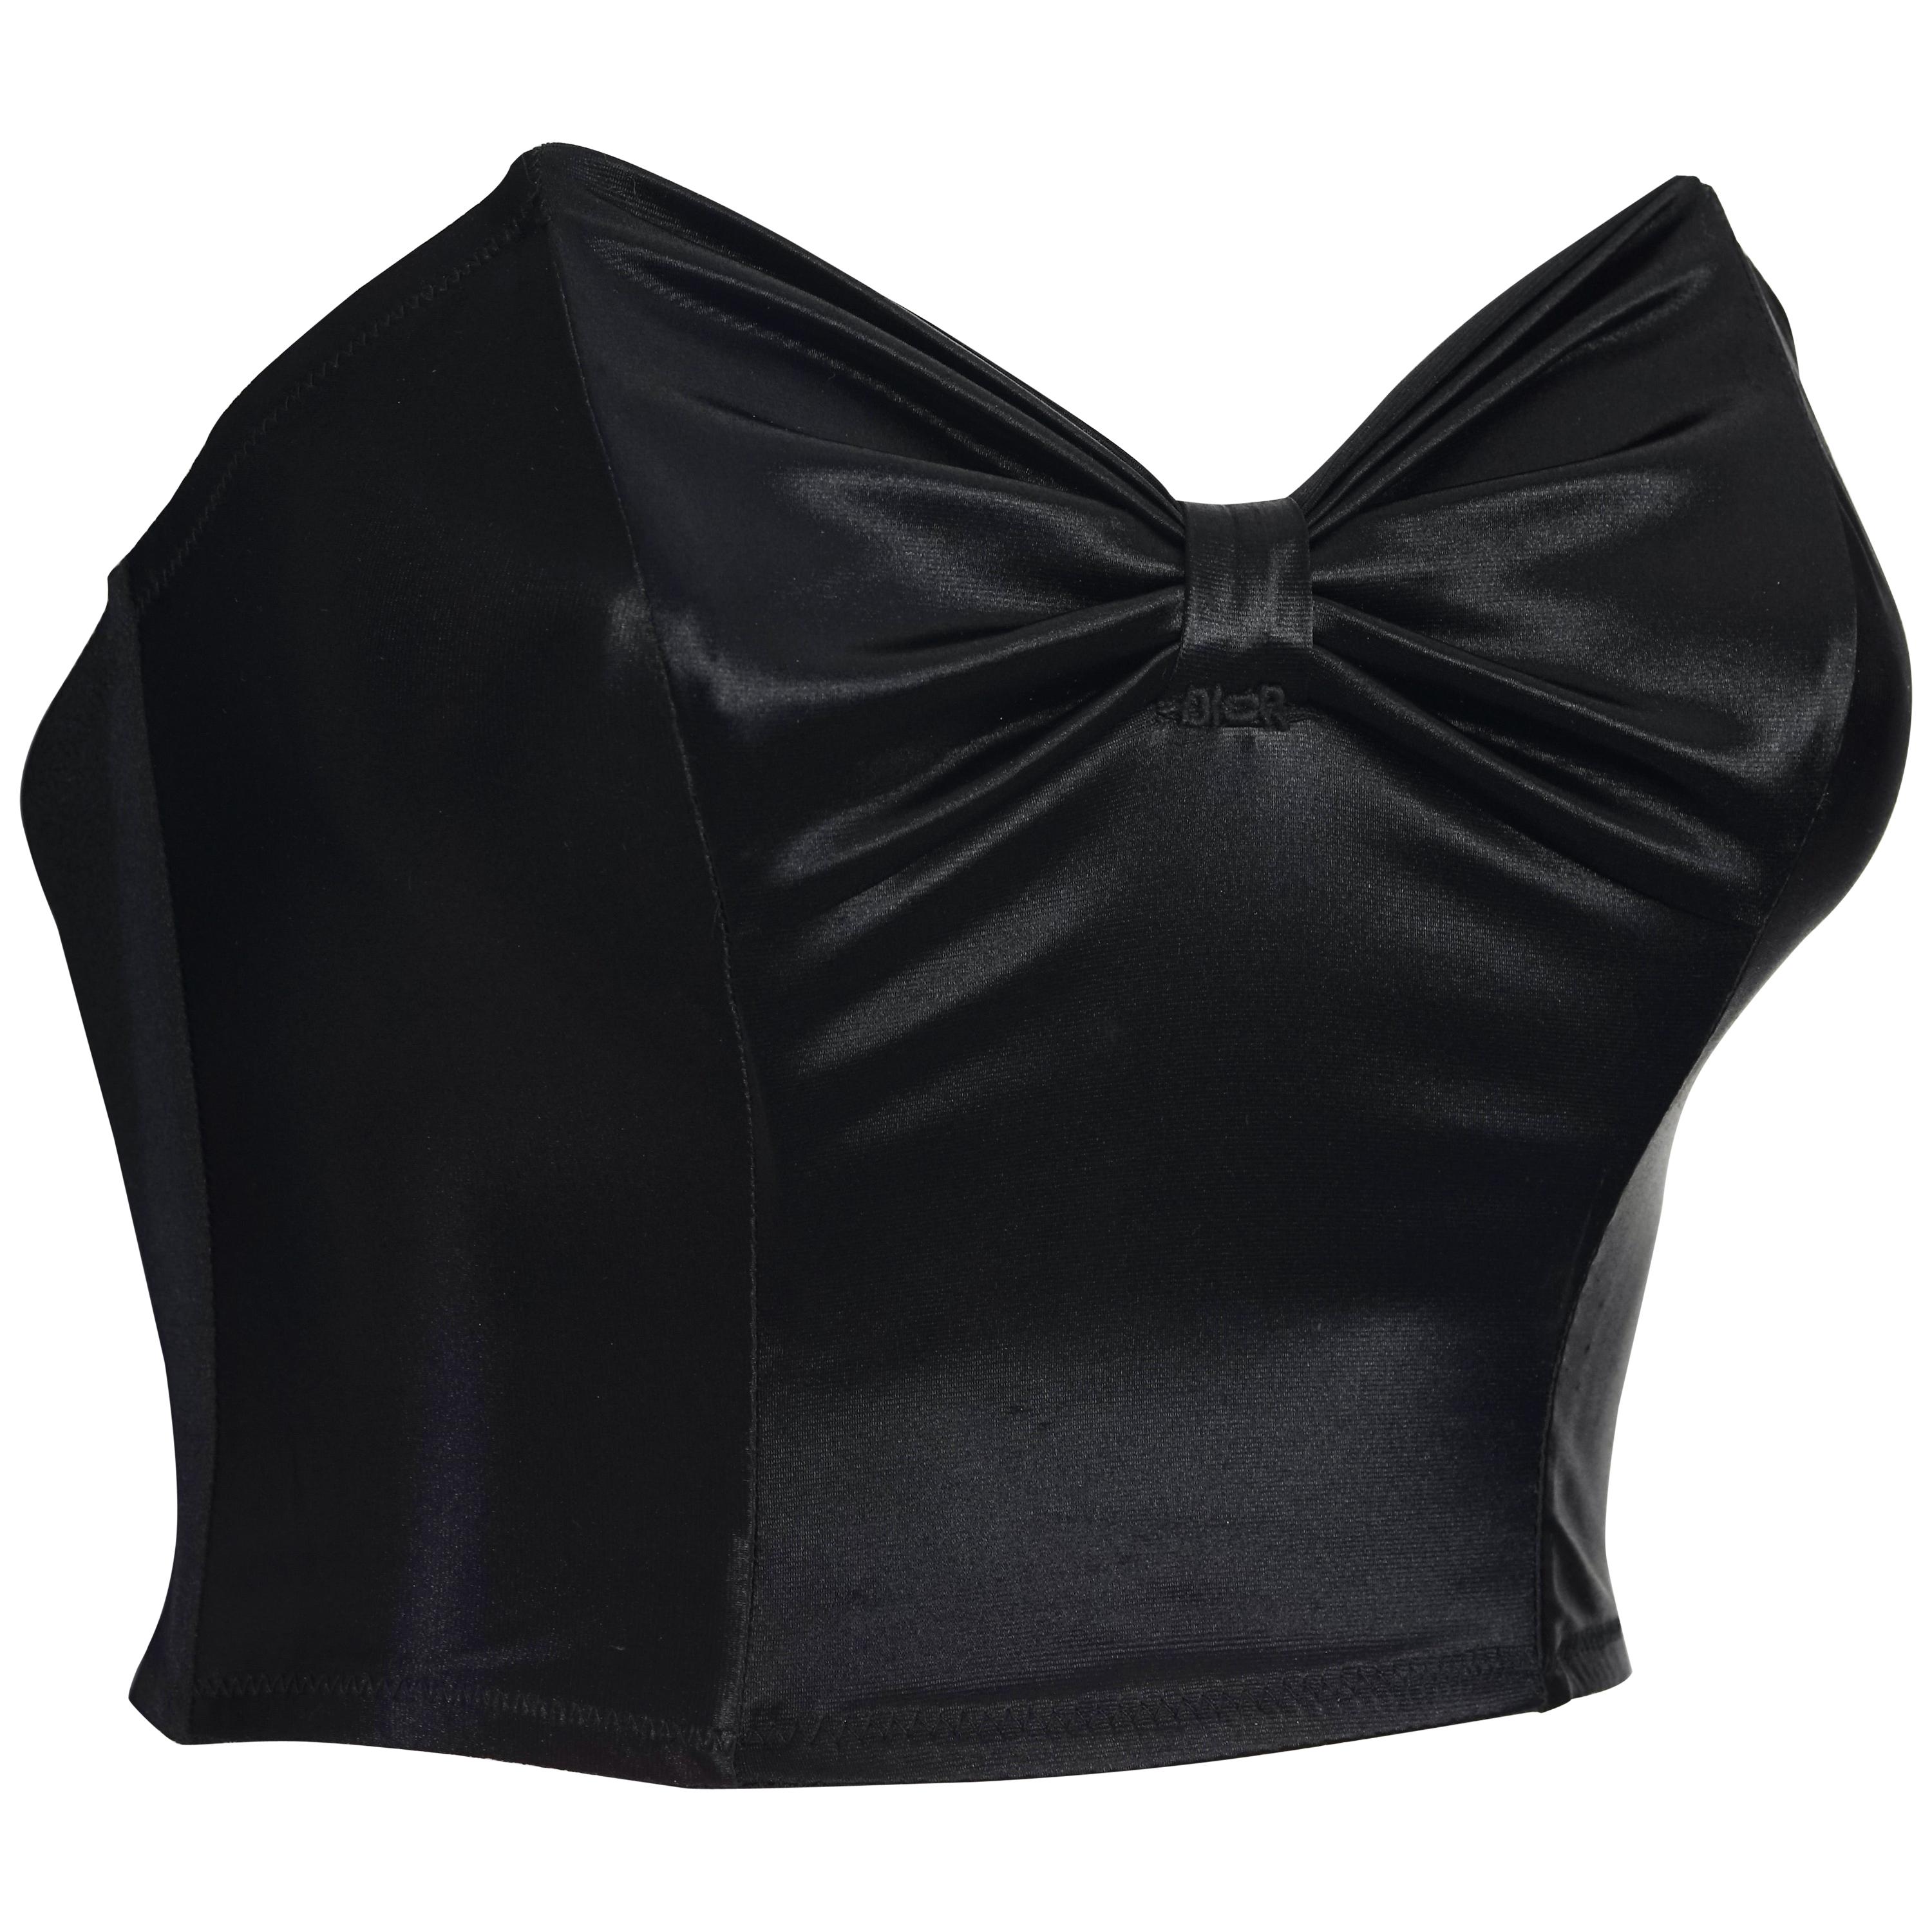 Vintage by Misty Christian Dior 2018 Strapless Crop Top